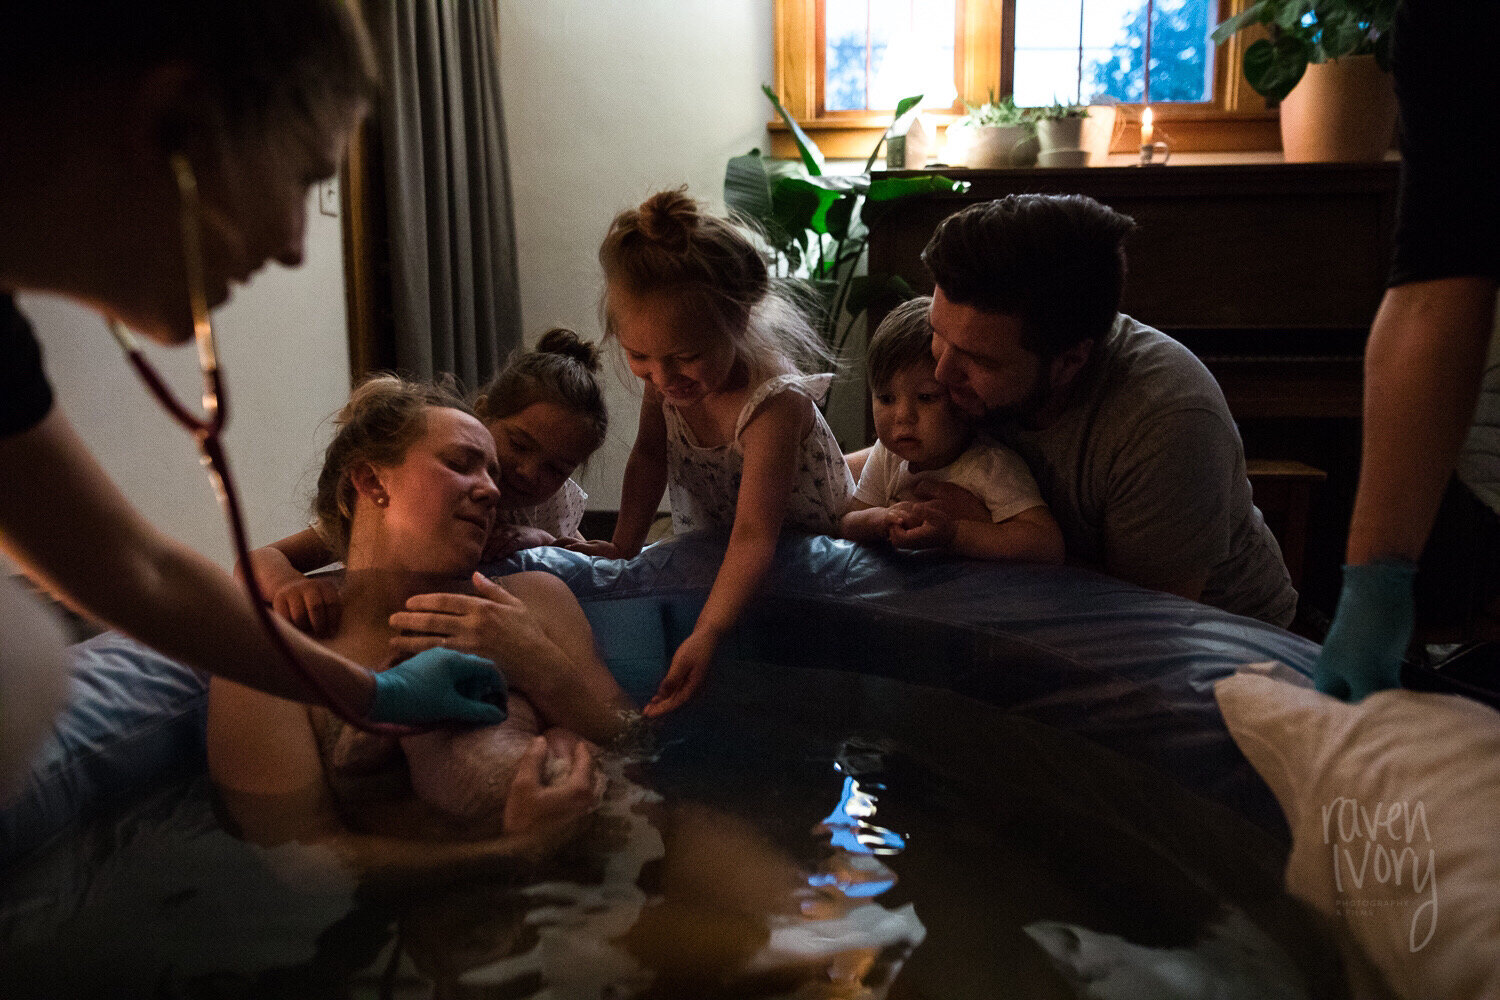 Born in the Water, A Collection of Gorgeous Waterbirth Photographs —  Gather Birth Cooperative